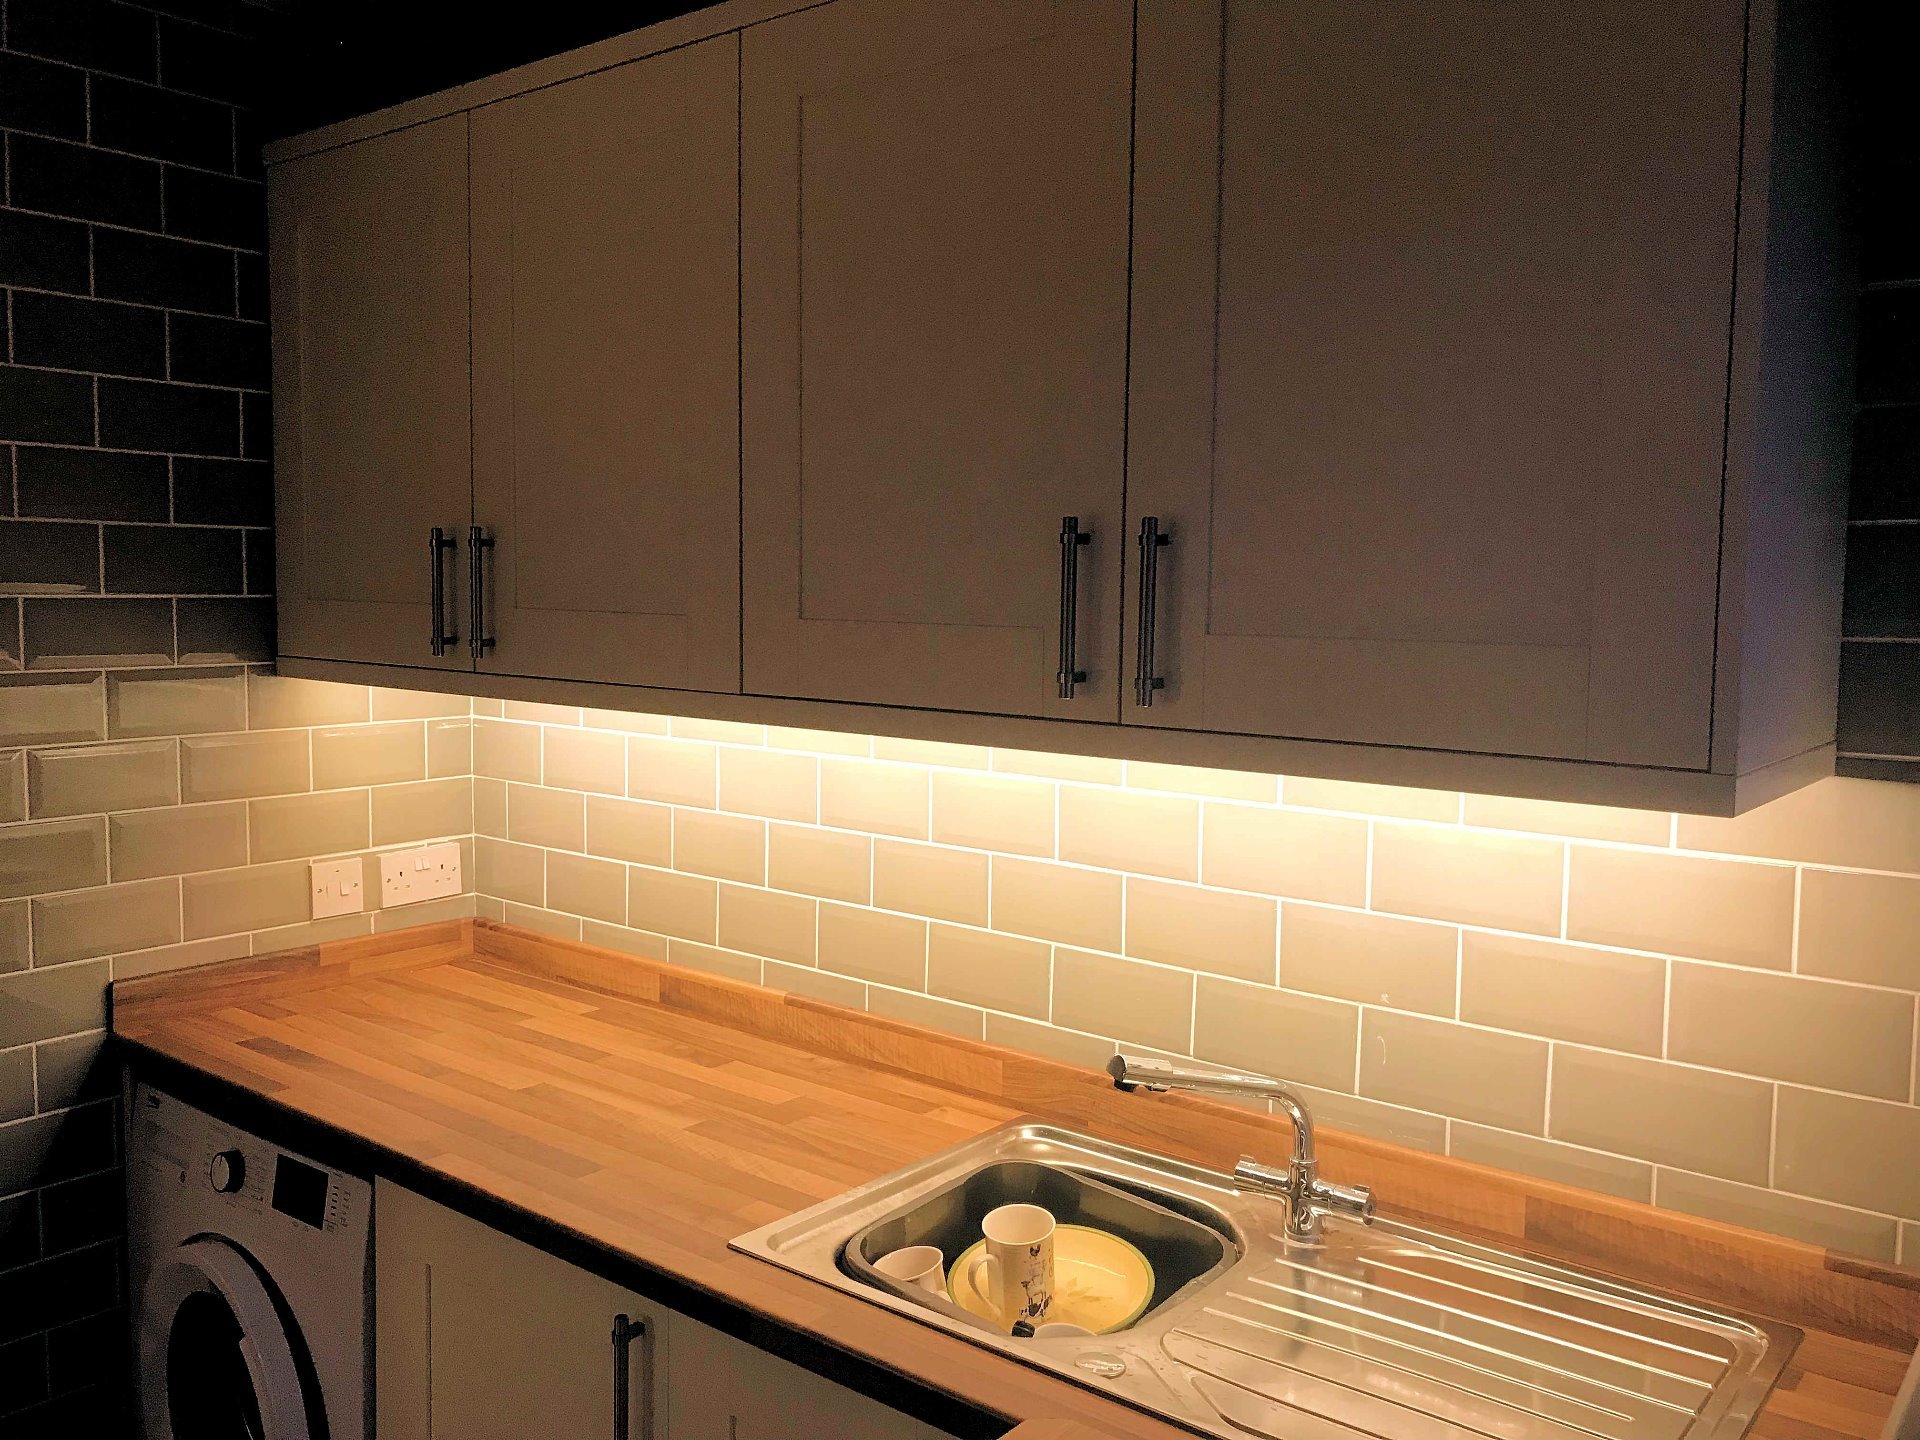 Kitchen Units Fitted with Led lighting. Barnstaple North Devon